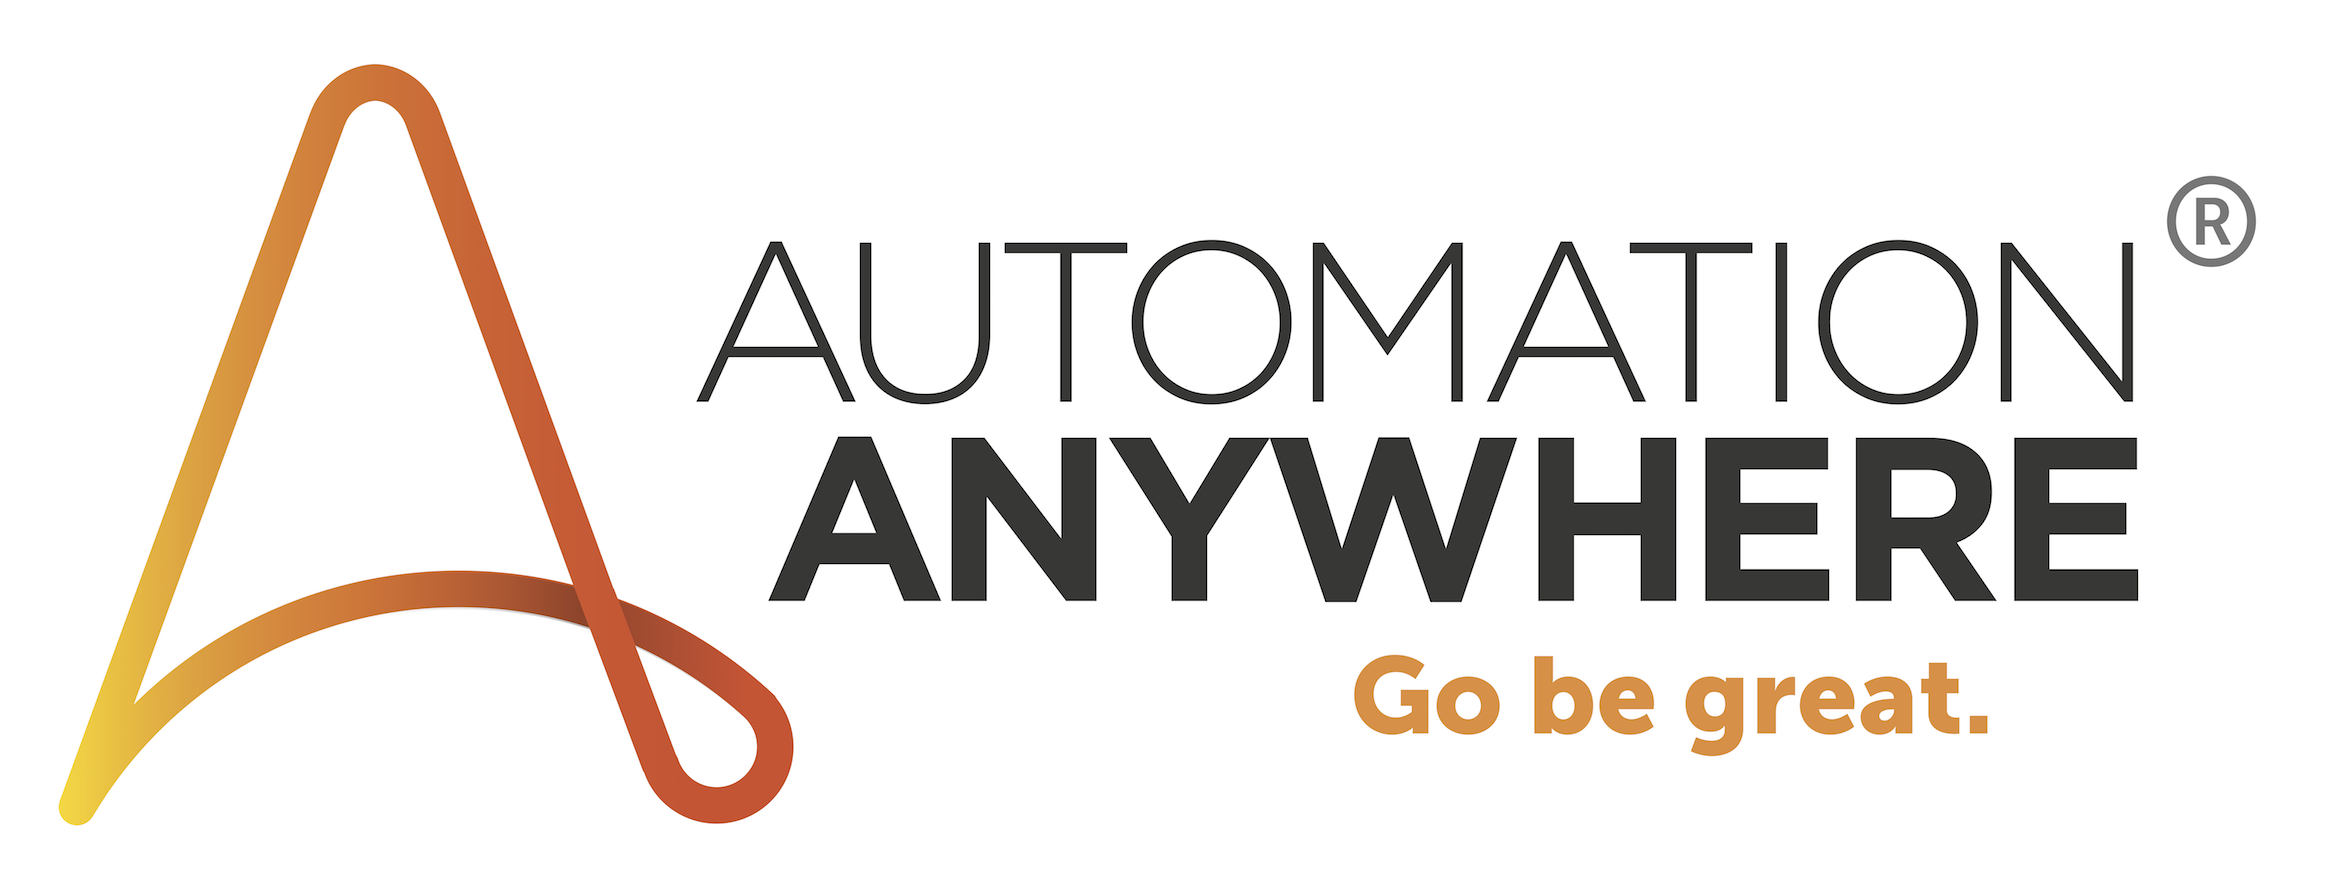 automation-anywhere-logo-png.png